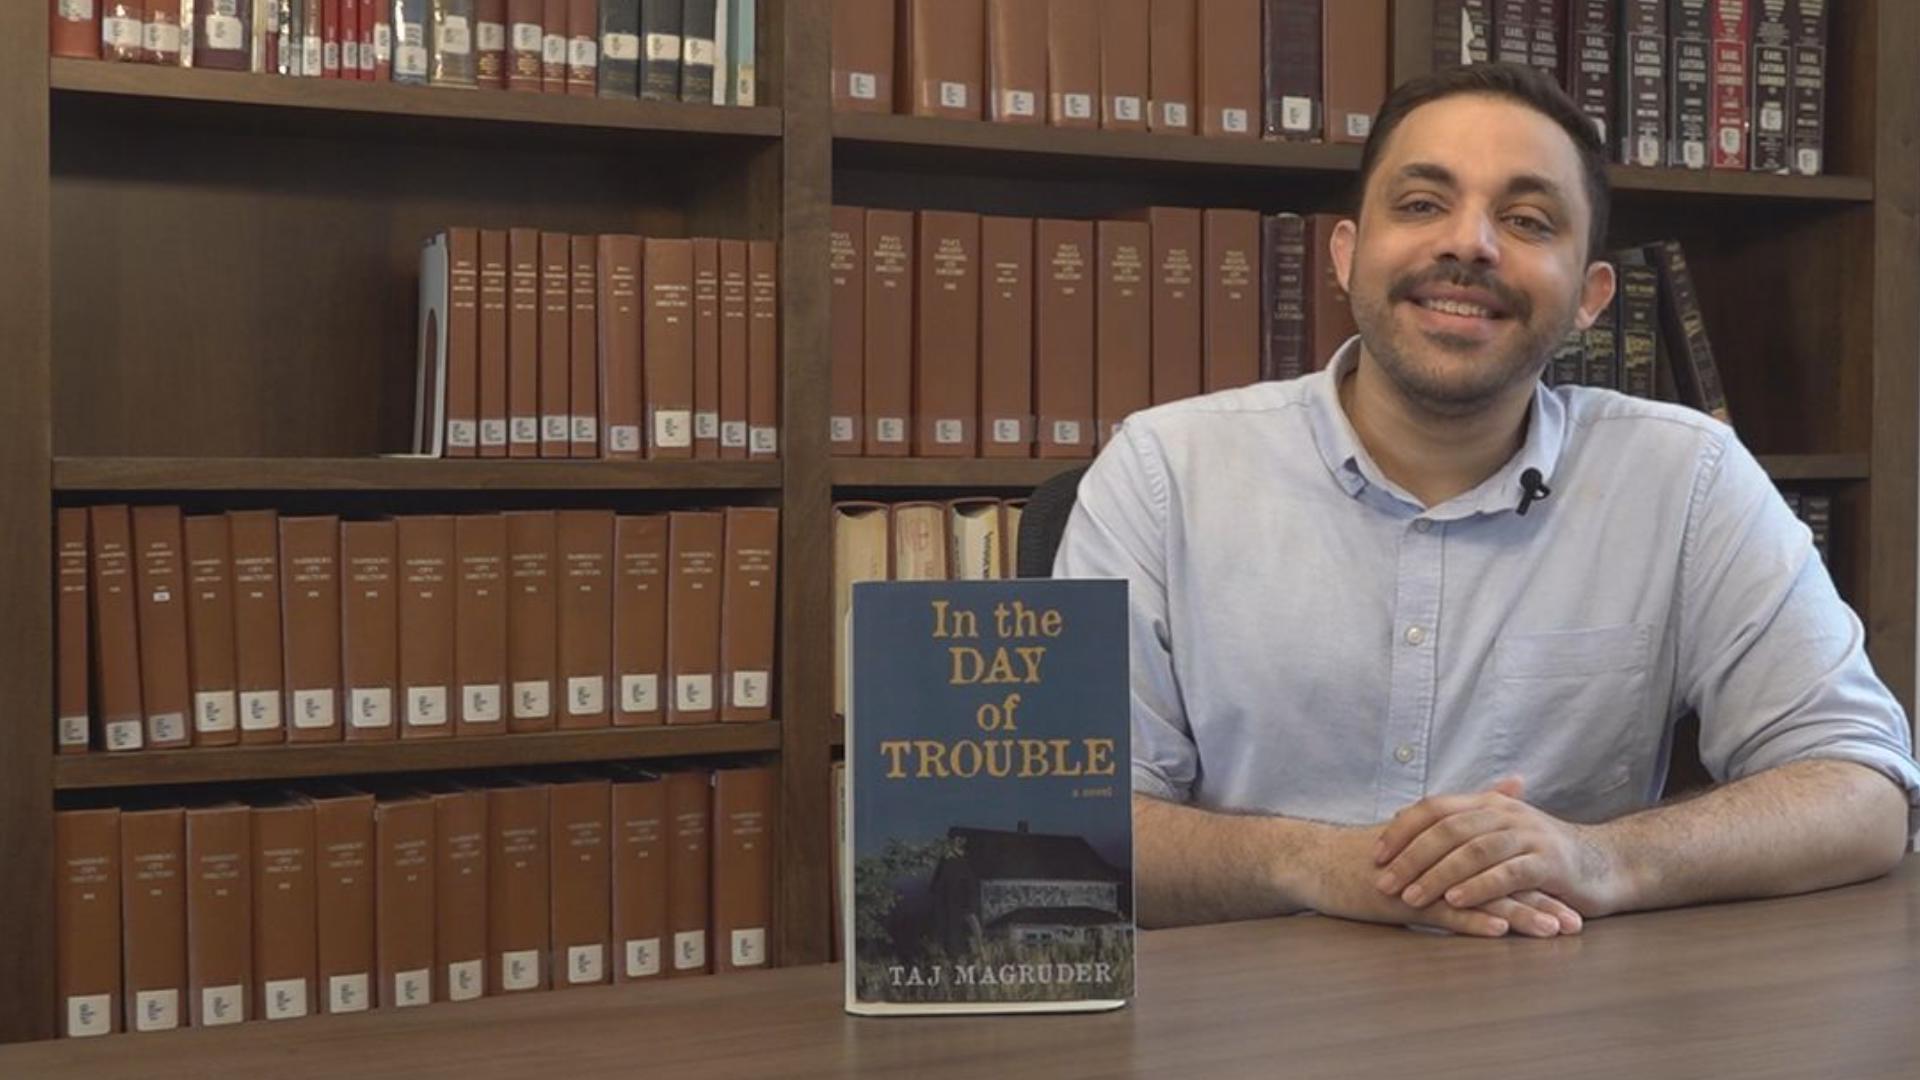 Taj Magruder is a lifelong Pennsylvania resident, public servant and author. His first book, "In the Day of Trouble," was published in March.